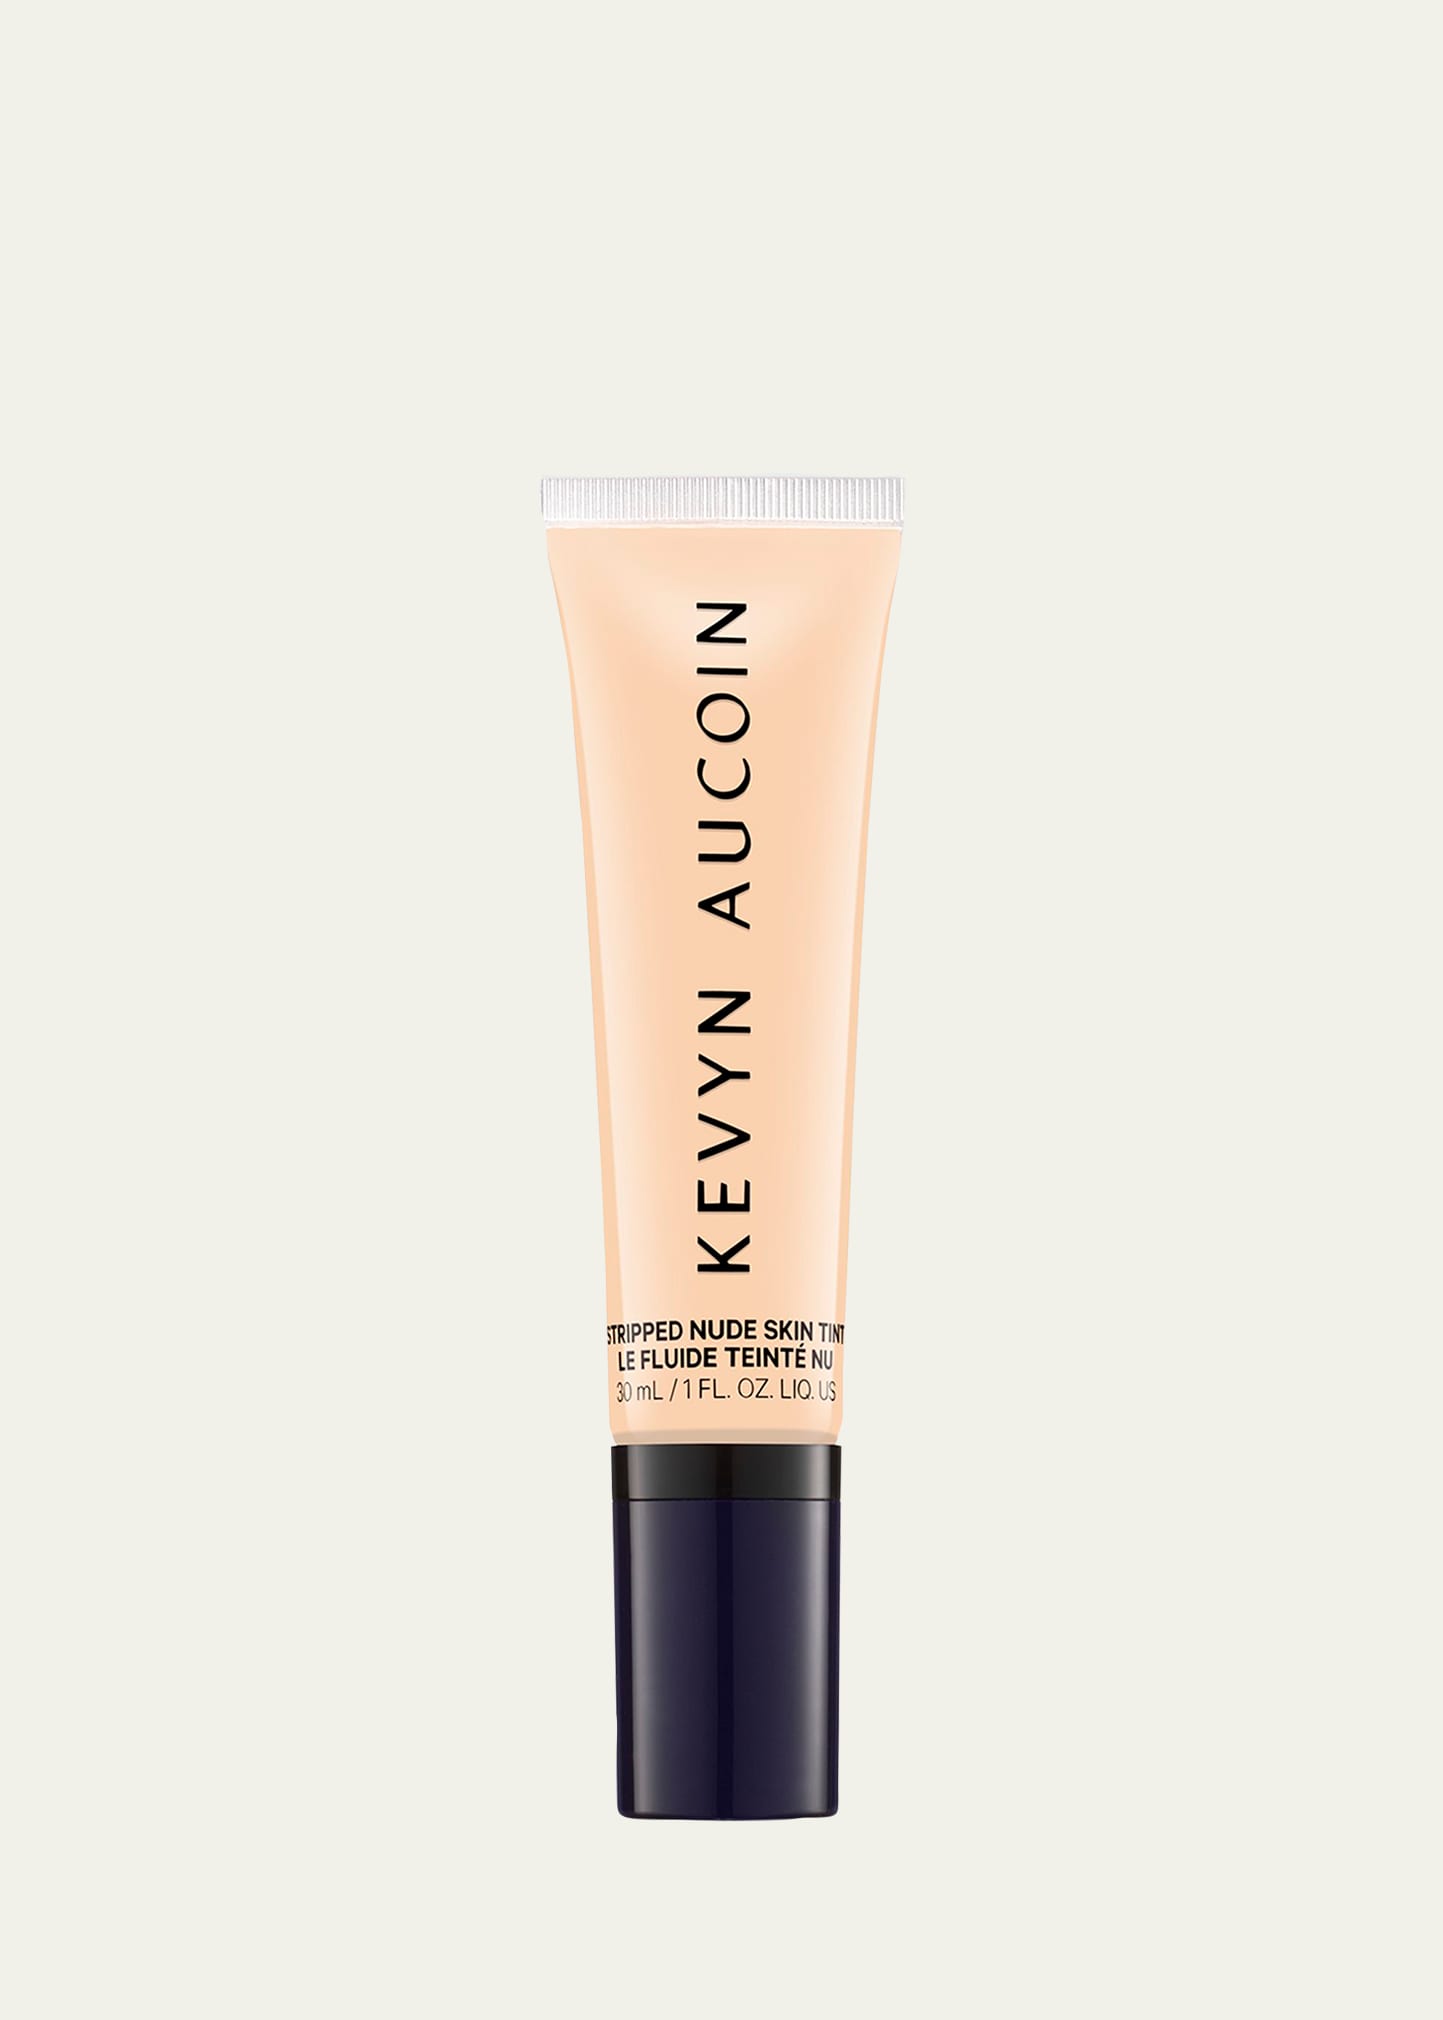 Kevyn Aucoin Stripped Nude Skin Tint In Neutral